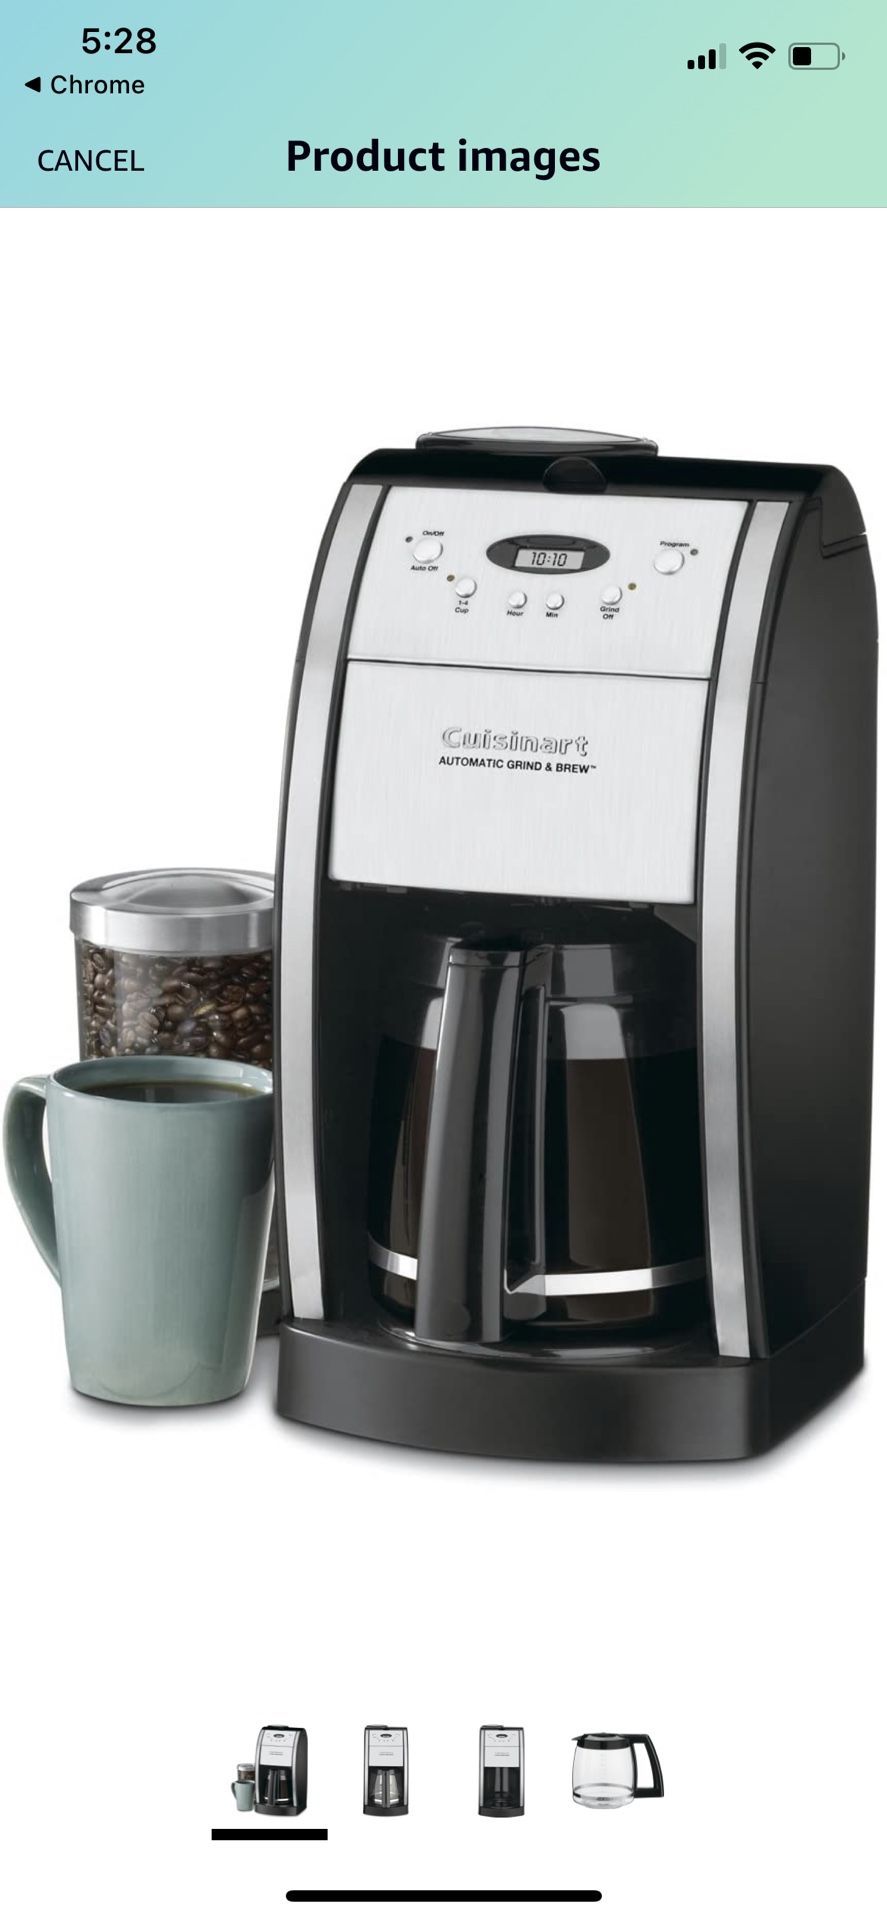 Cui’s inset 12 Cup Grind And Brew Coffee Machine